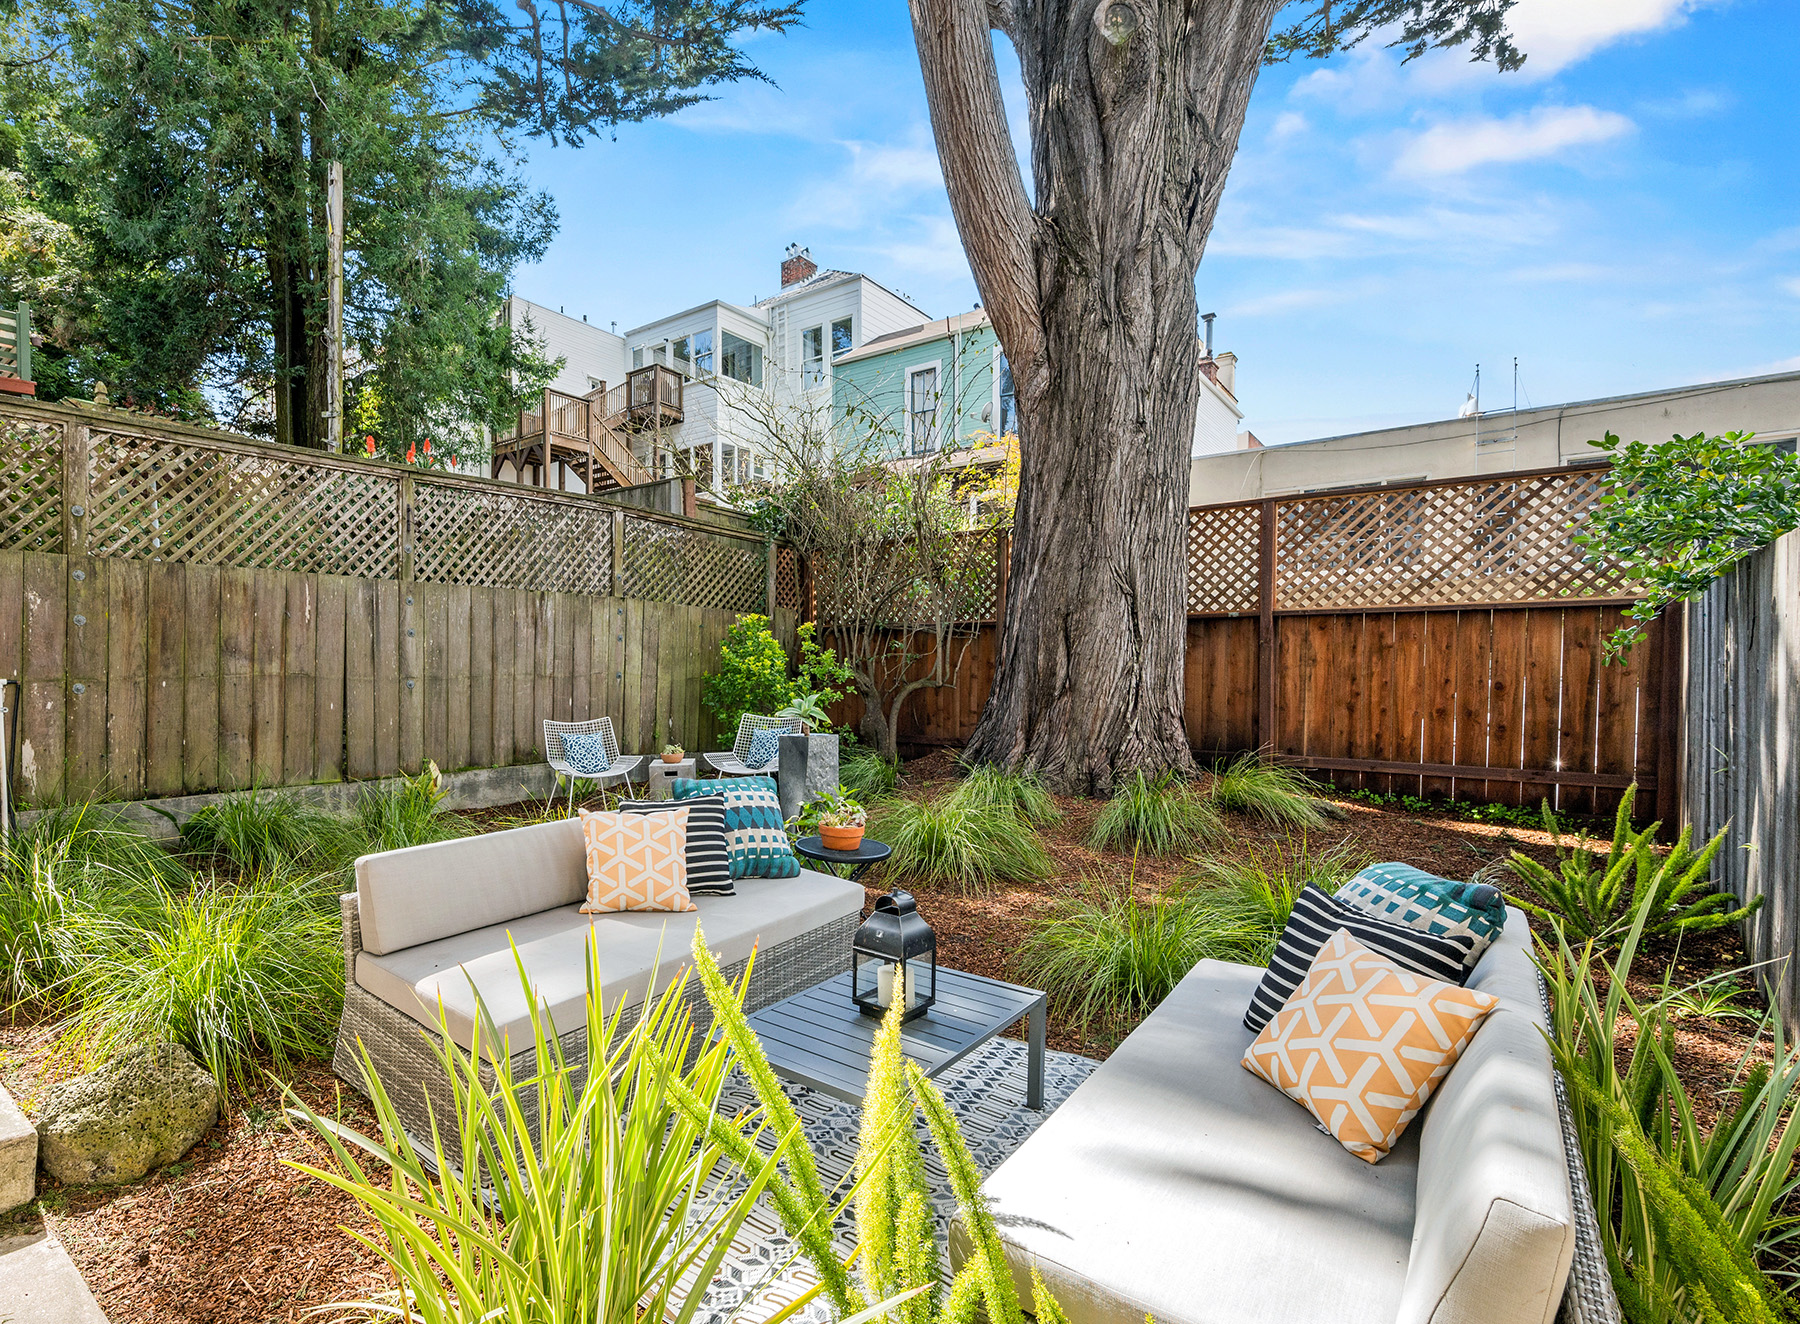 View of the private deeded garden at 41 Delmar